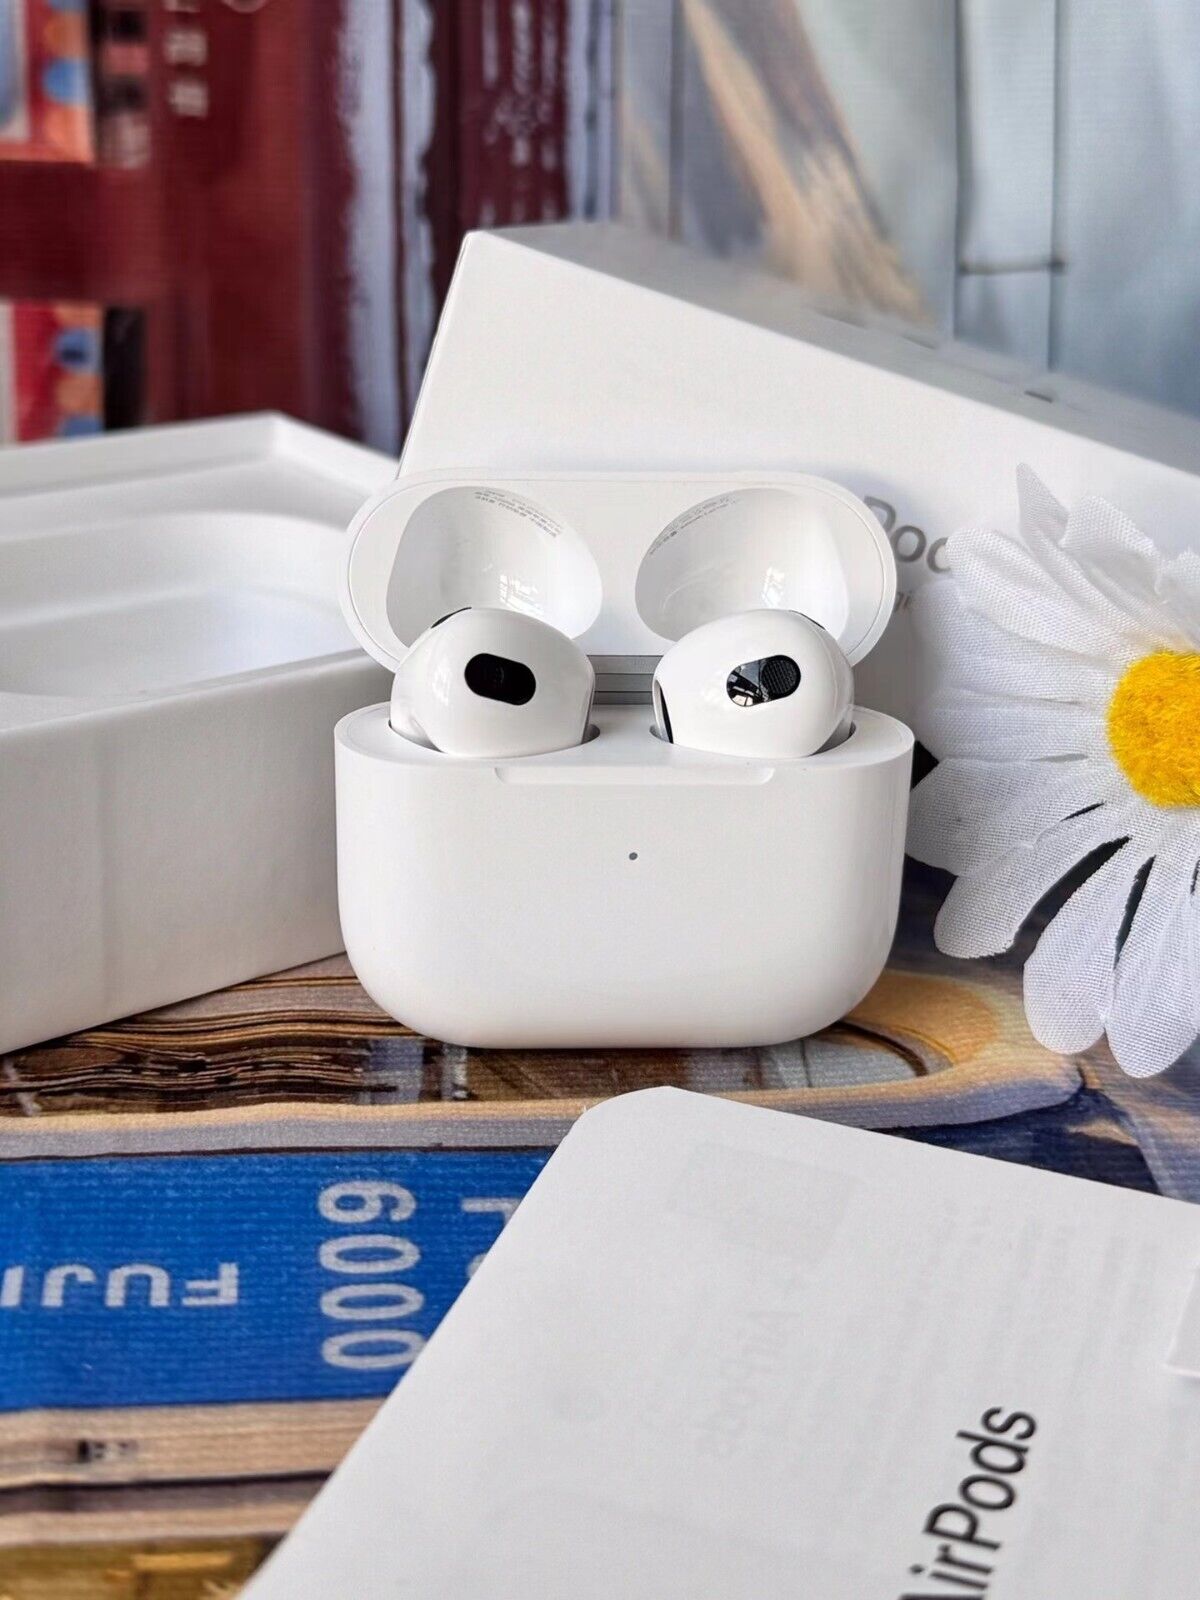 New Apple AirPods 3rd Generation With Earphone Earbuds & Wireless Charging Box ✅